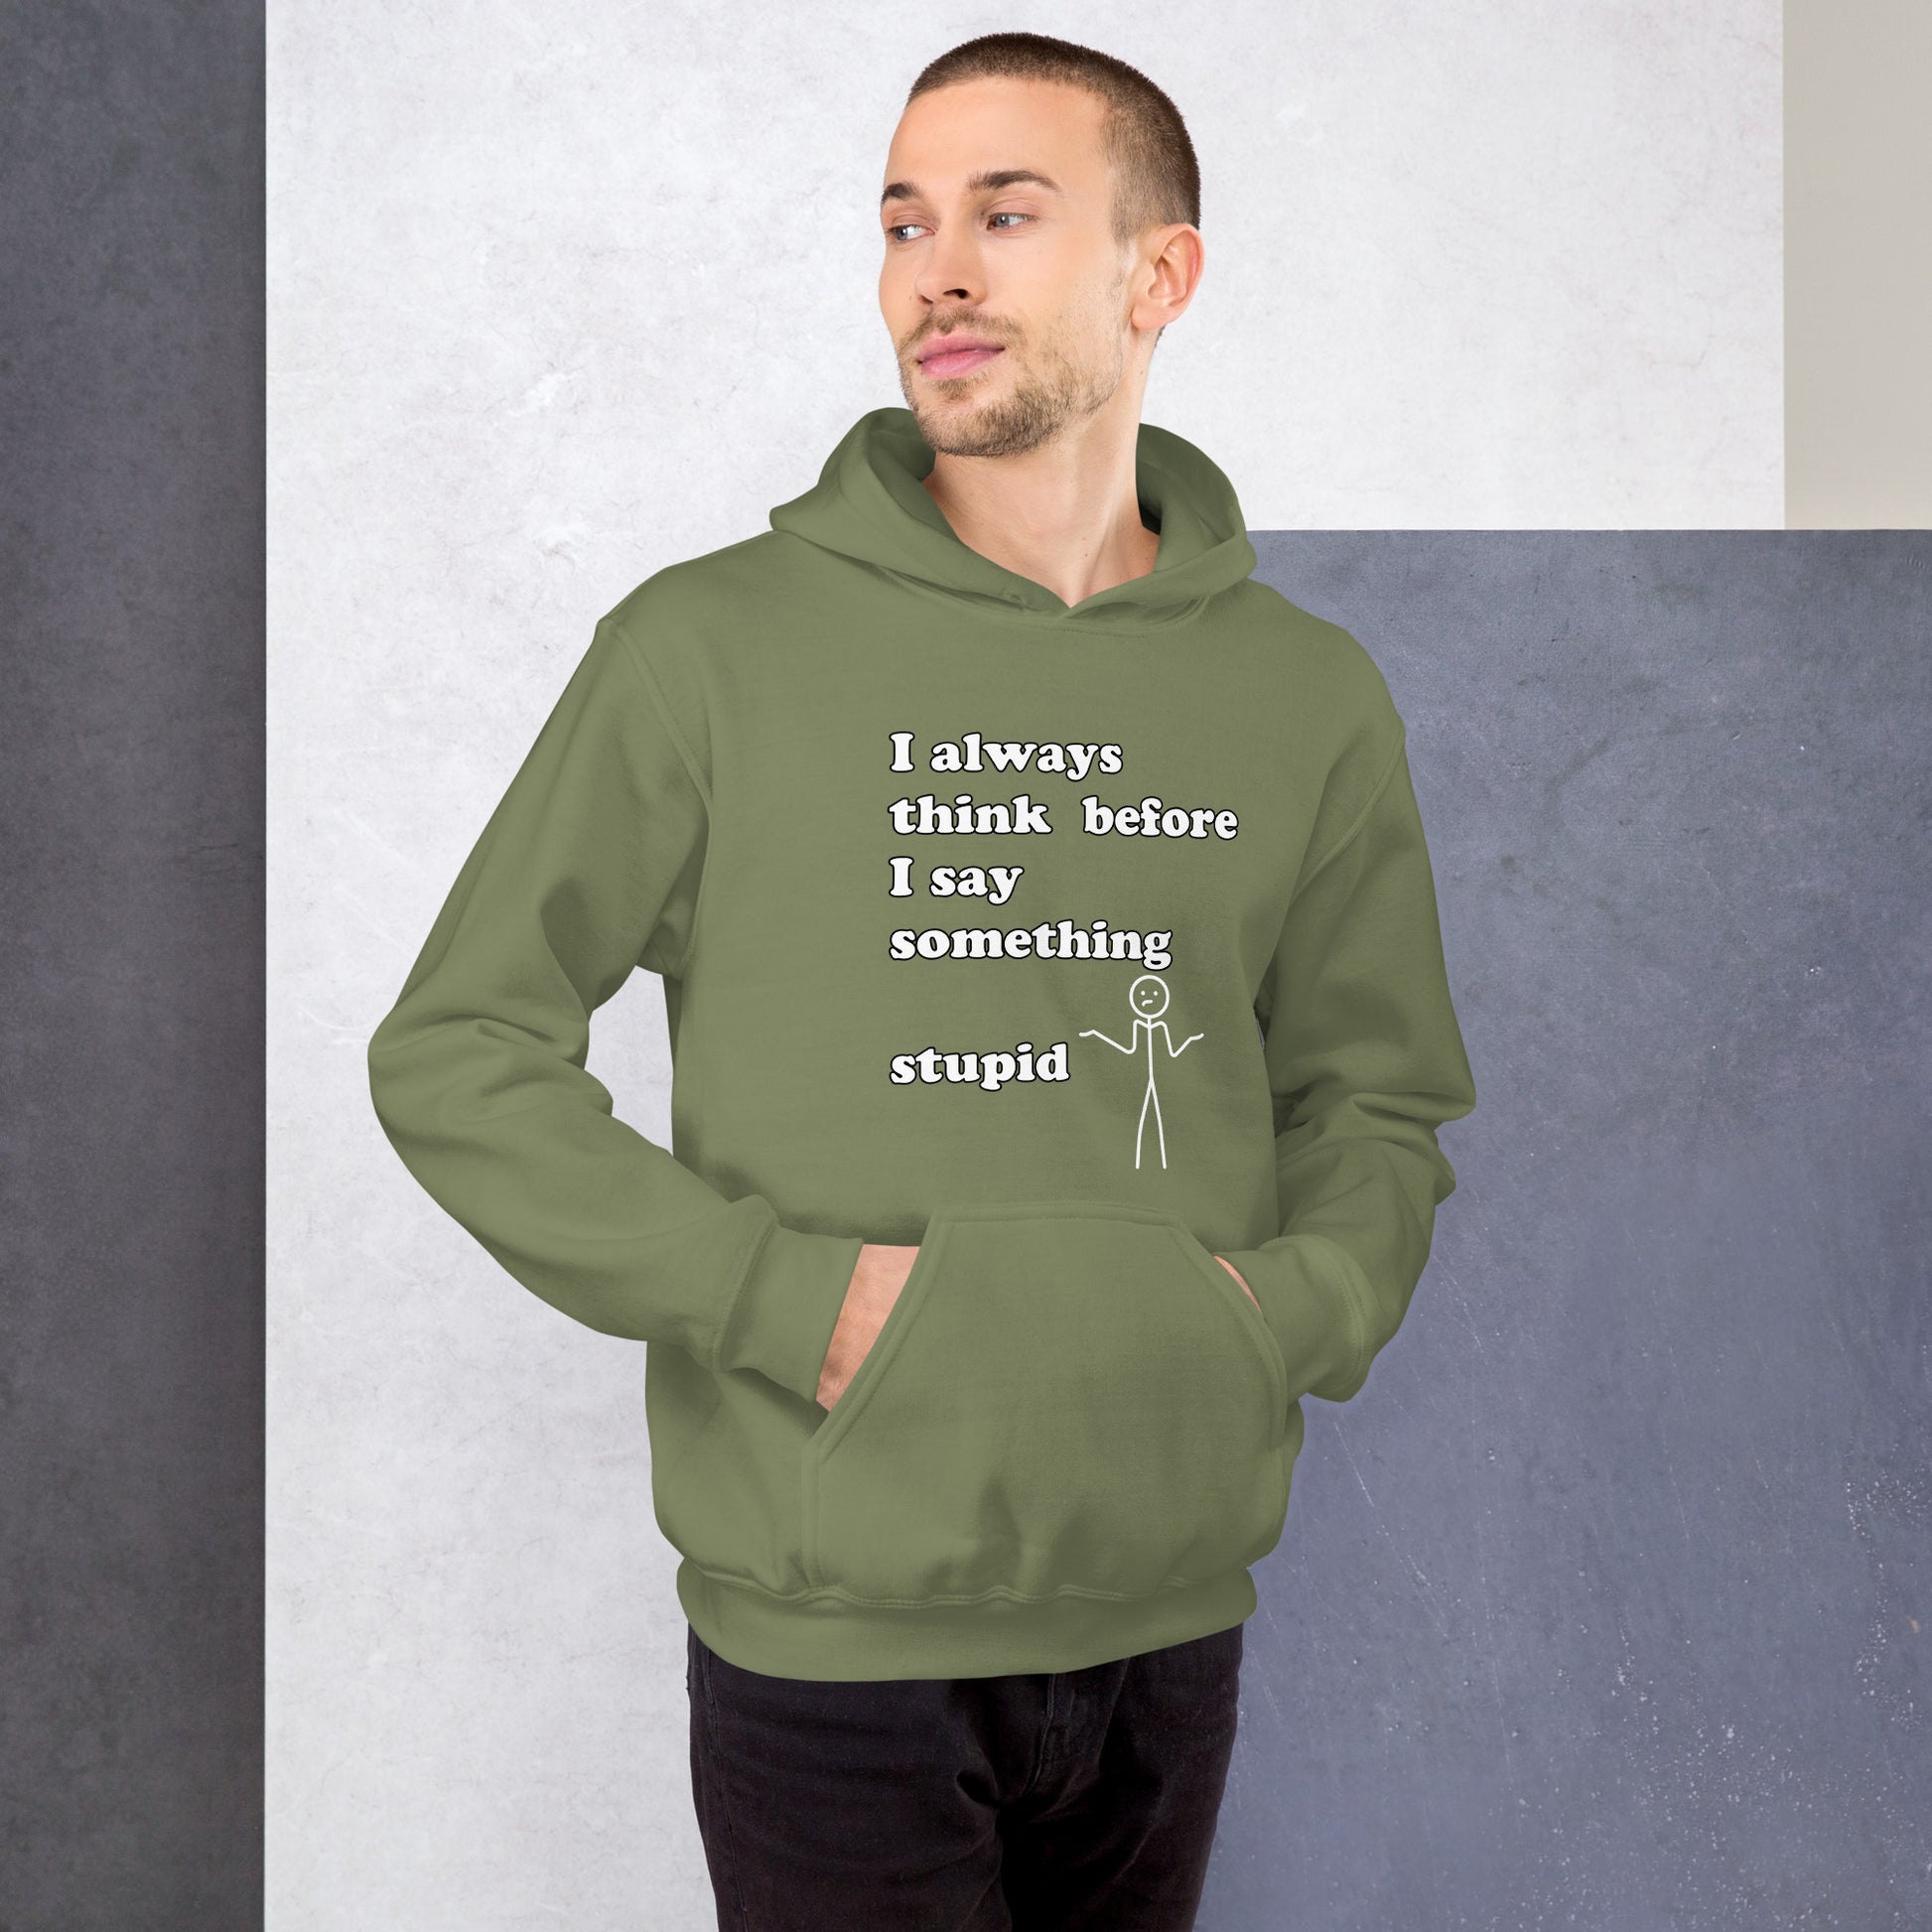 Man with military green hoodie with text "I always think before I say something stupid"